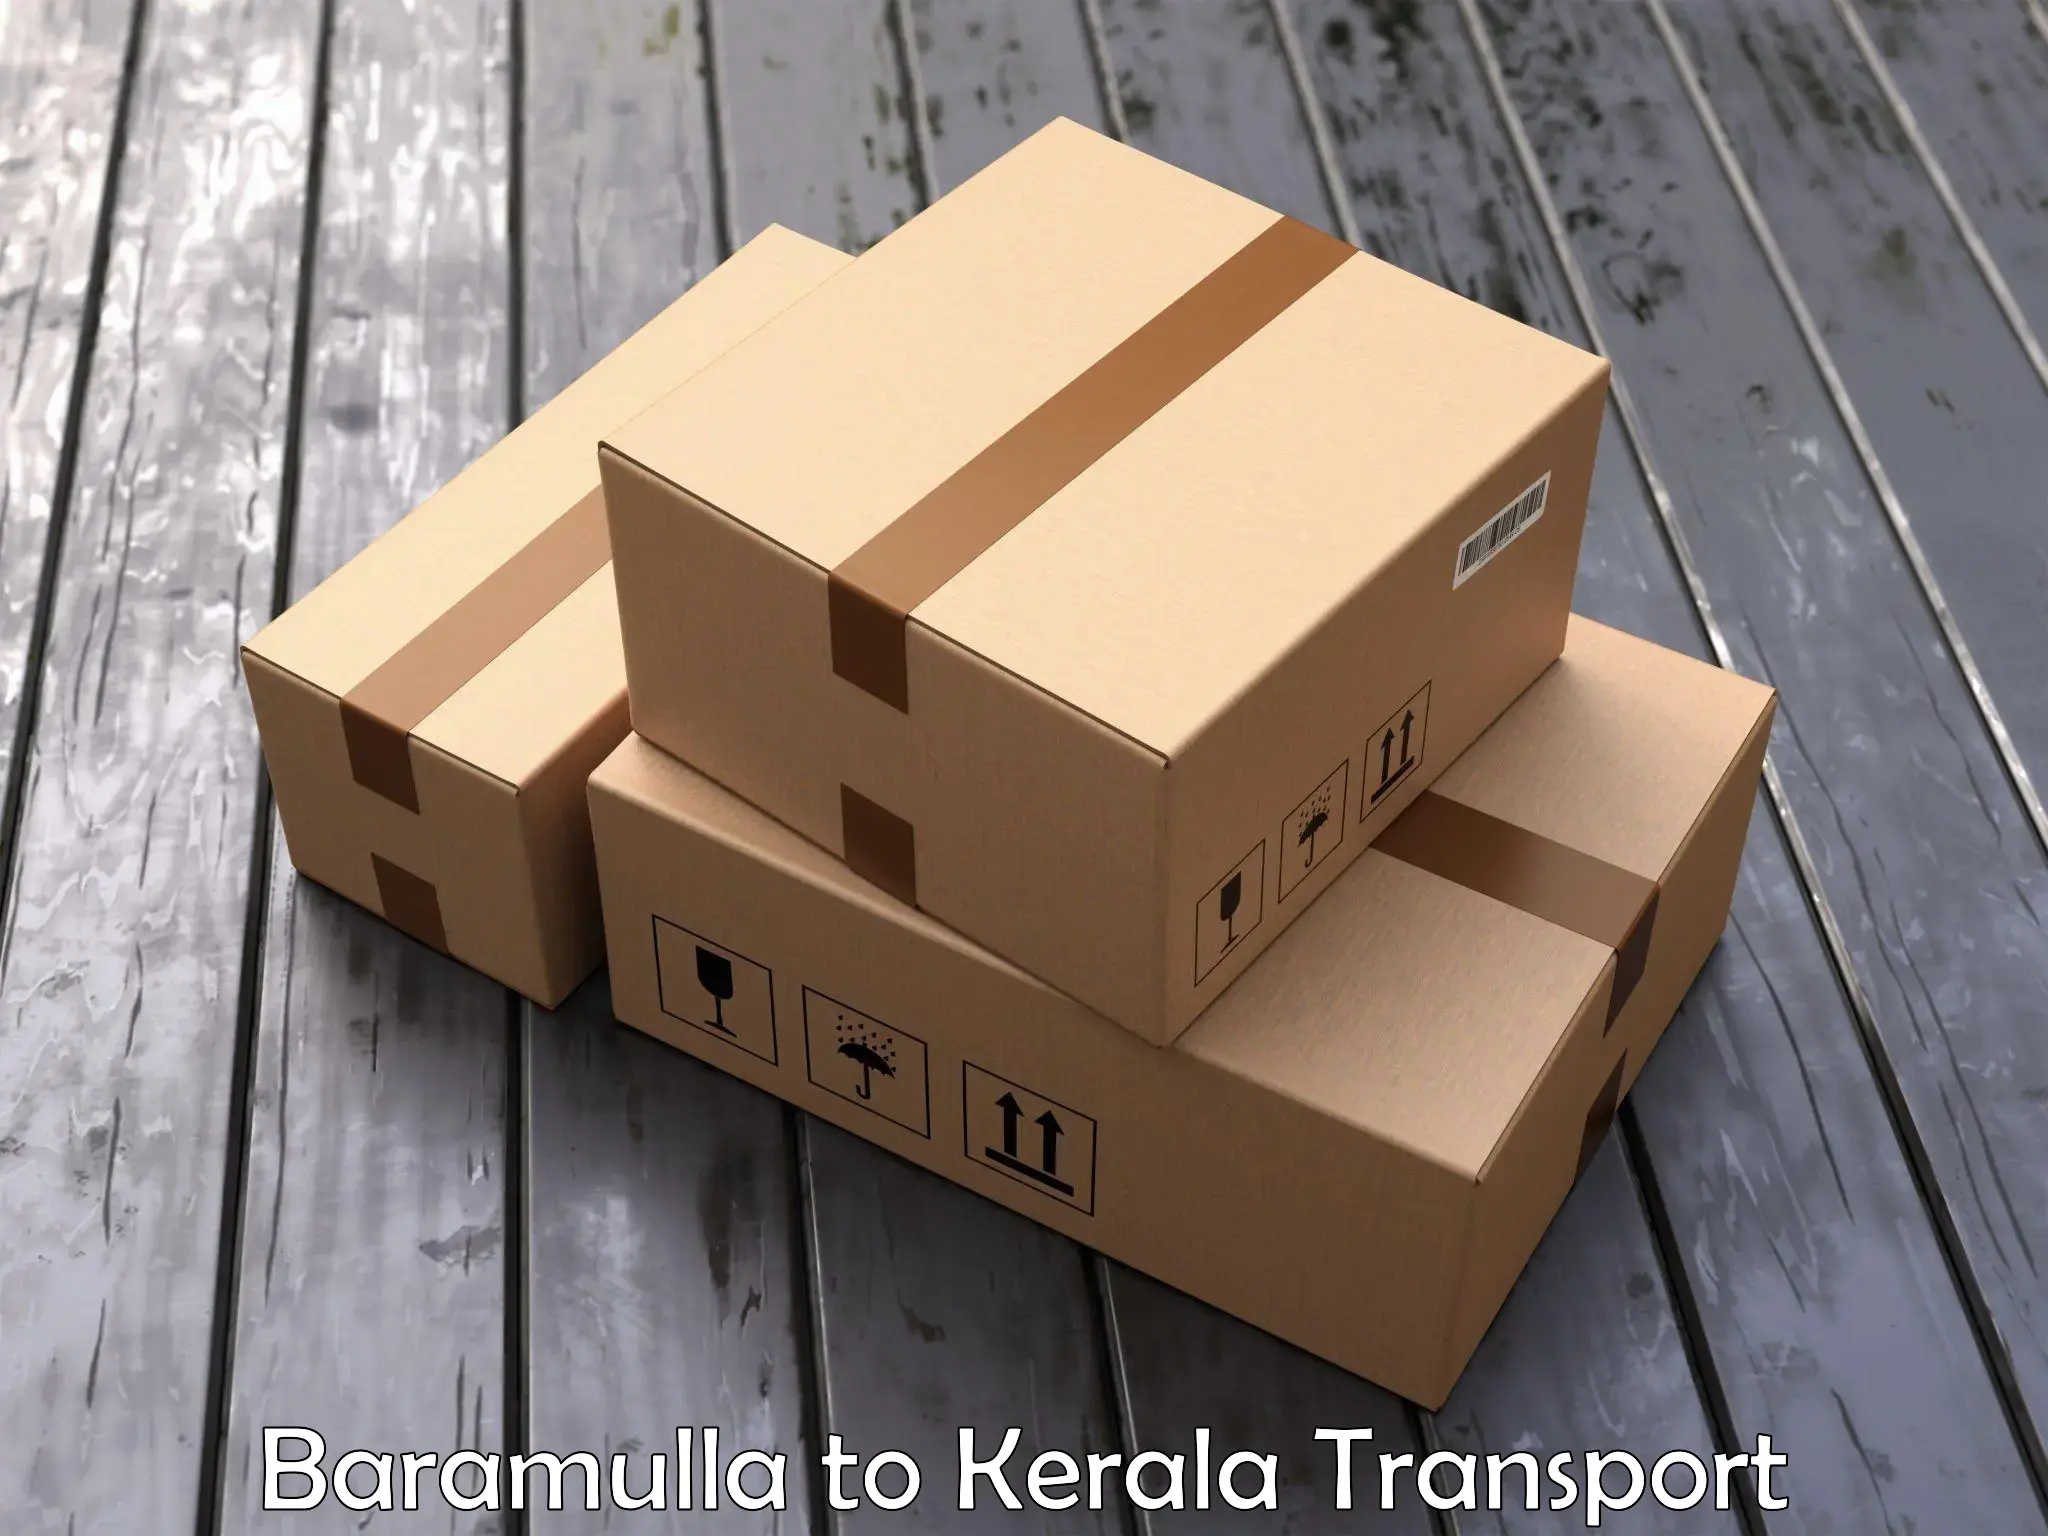 Truck transport companies in India Baramulla to Mahe